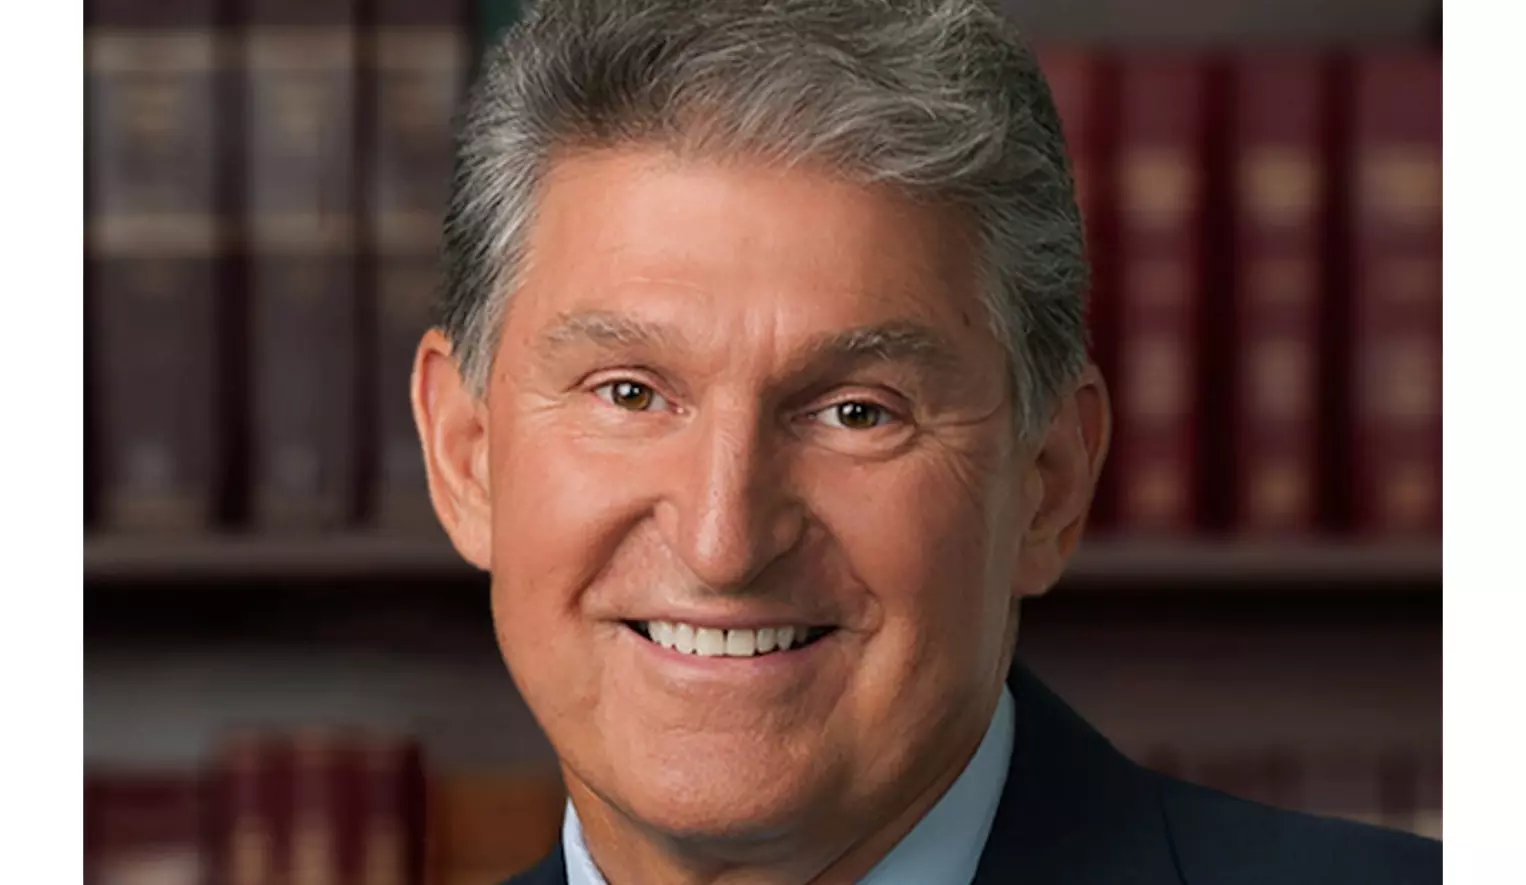 Thank you, U.S. Sen. Joe Manchin for standing against taxpayer funding of abortion